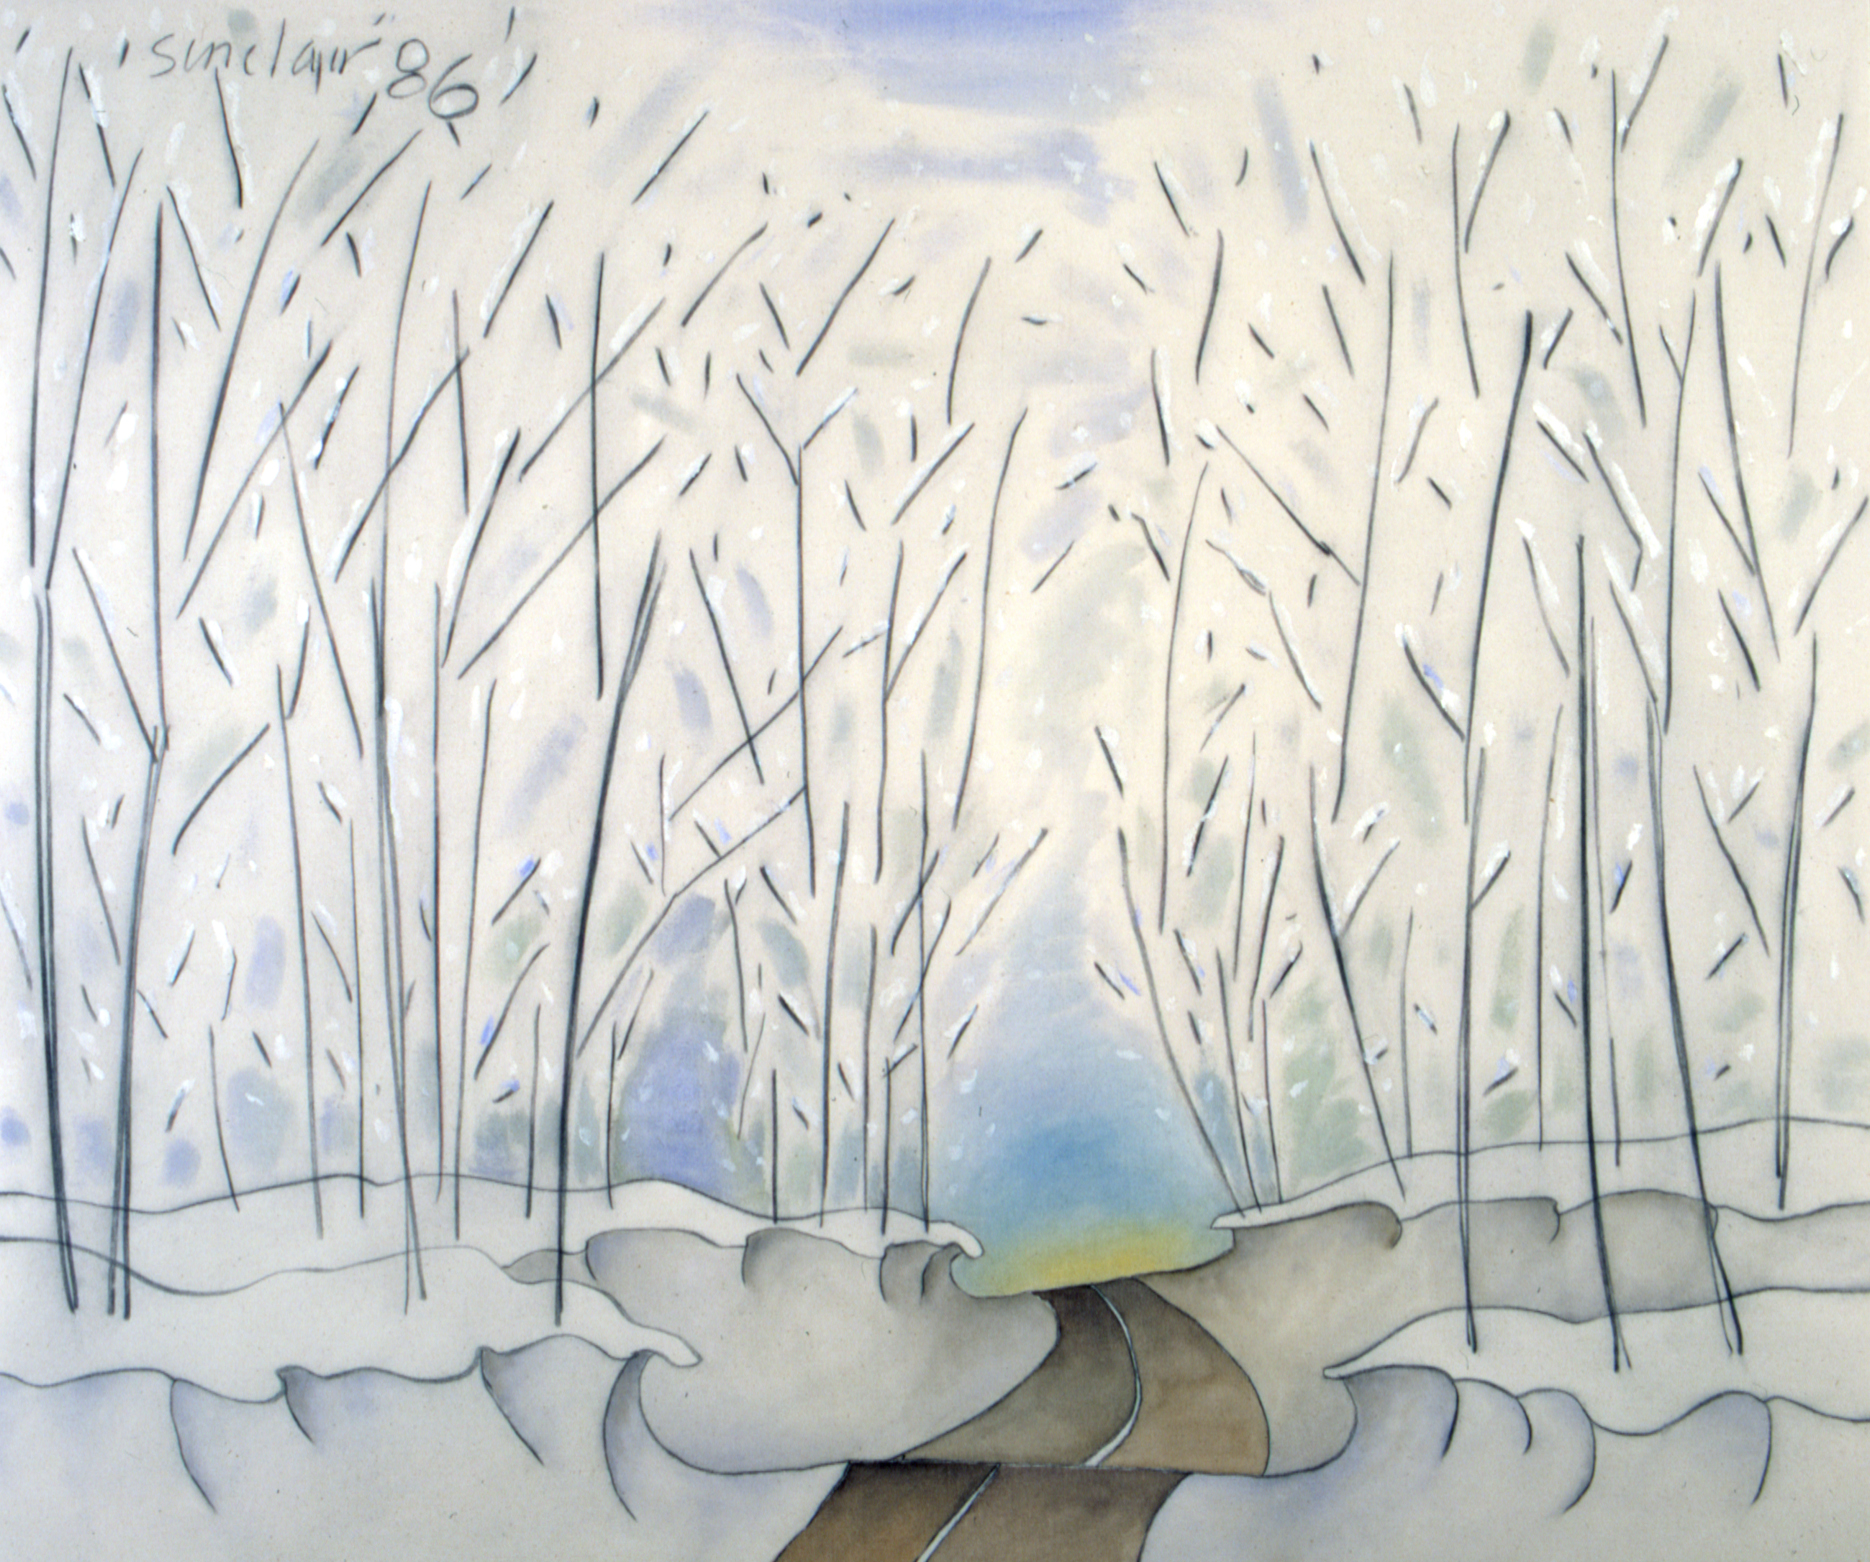 A painting of an empty road in a forest with banks of snow on each side